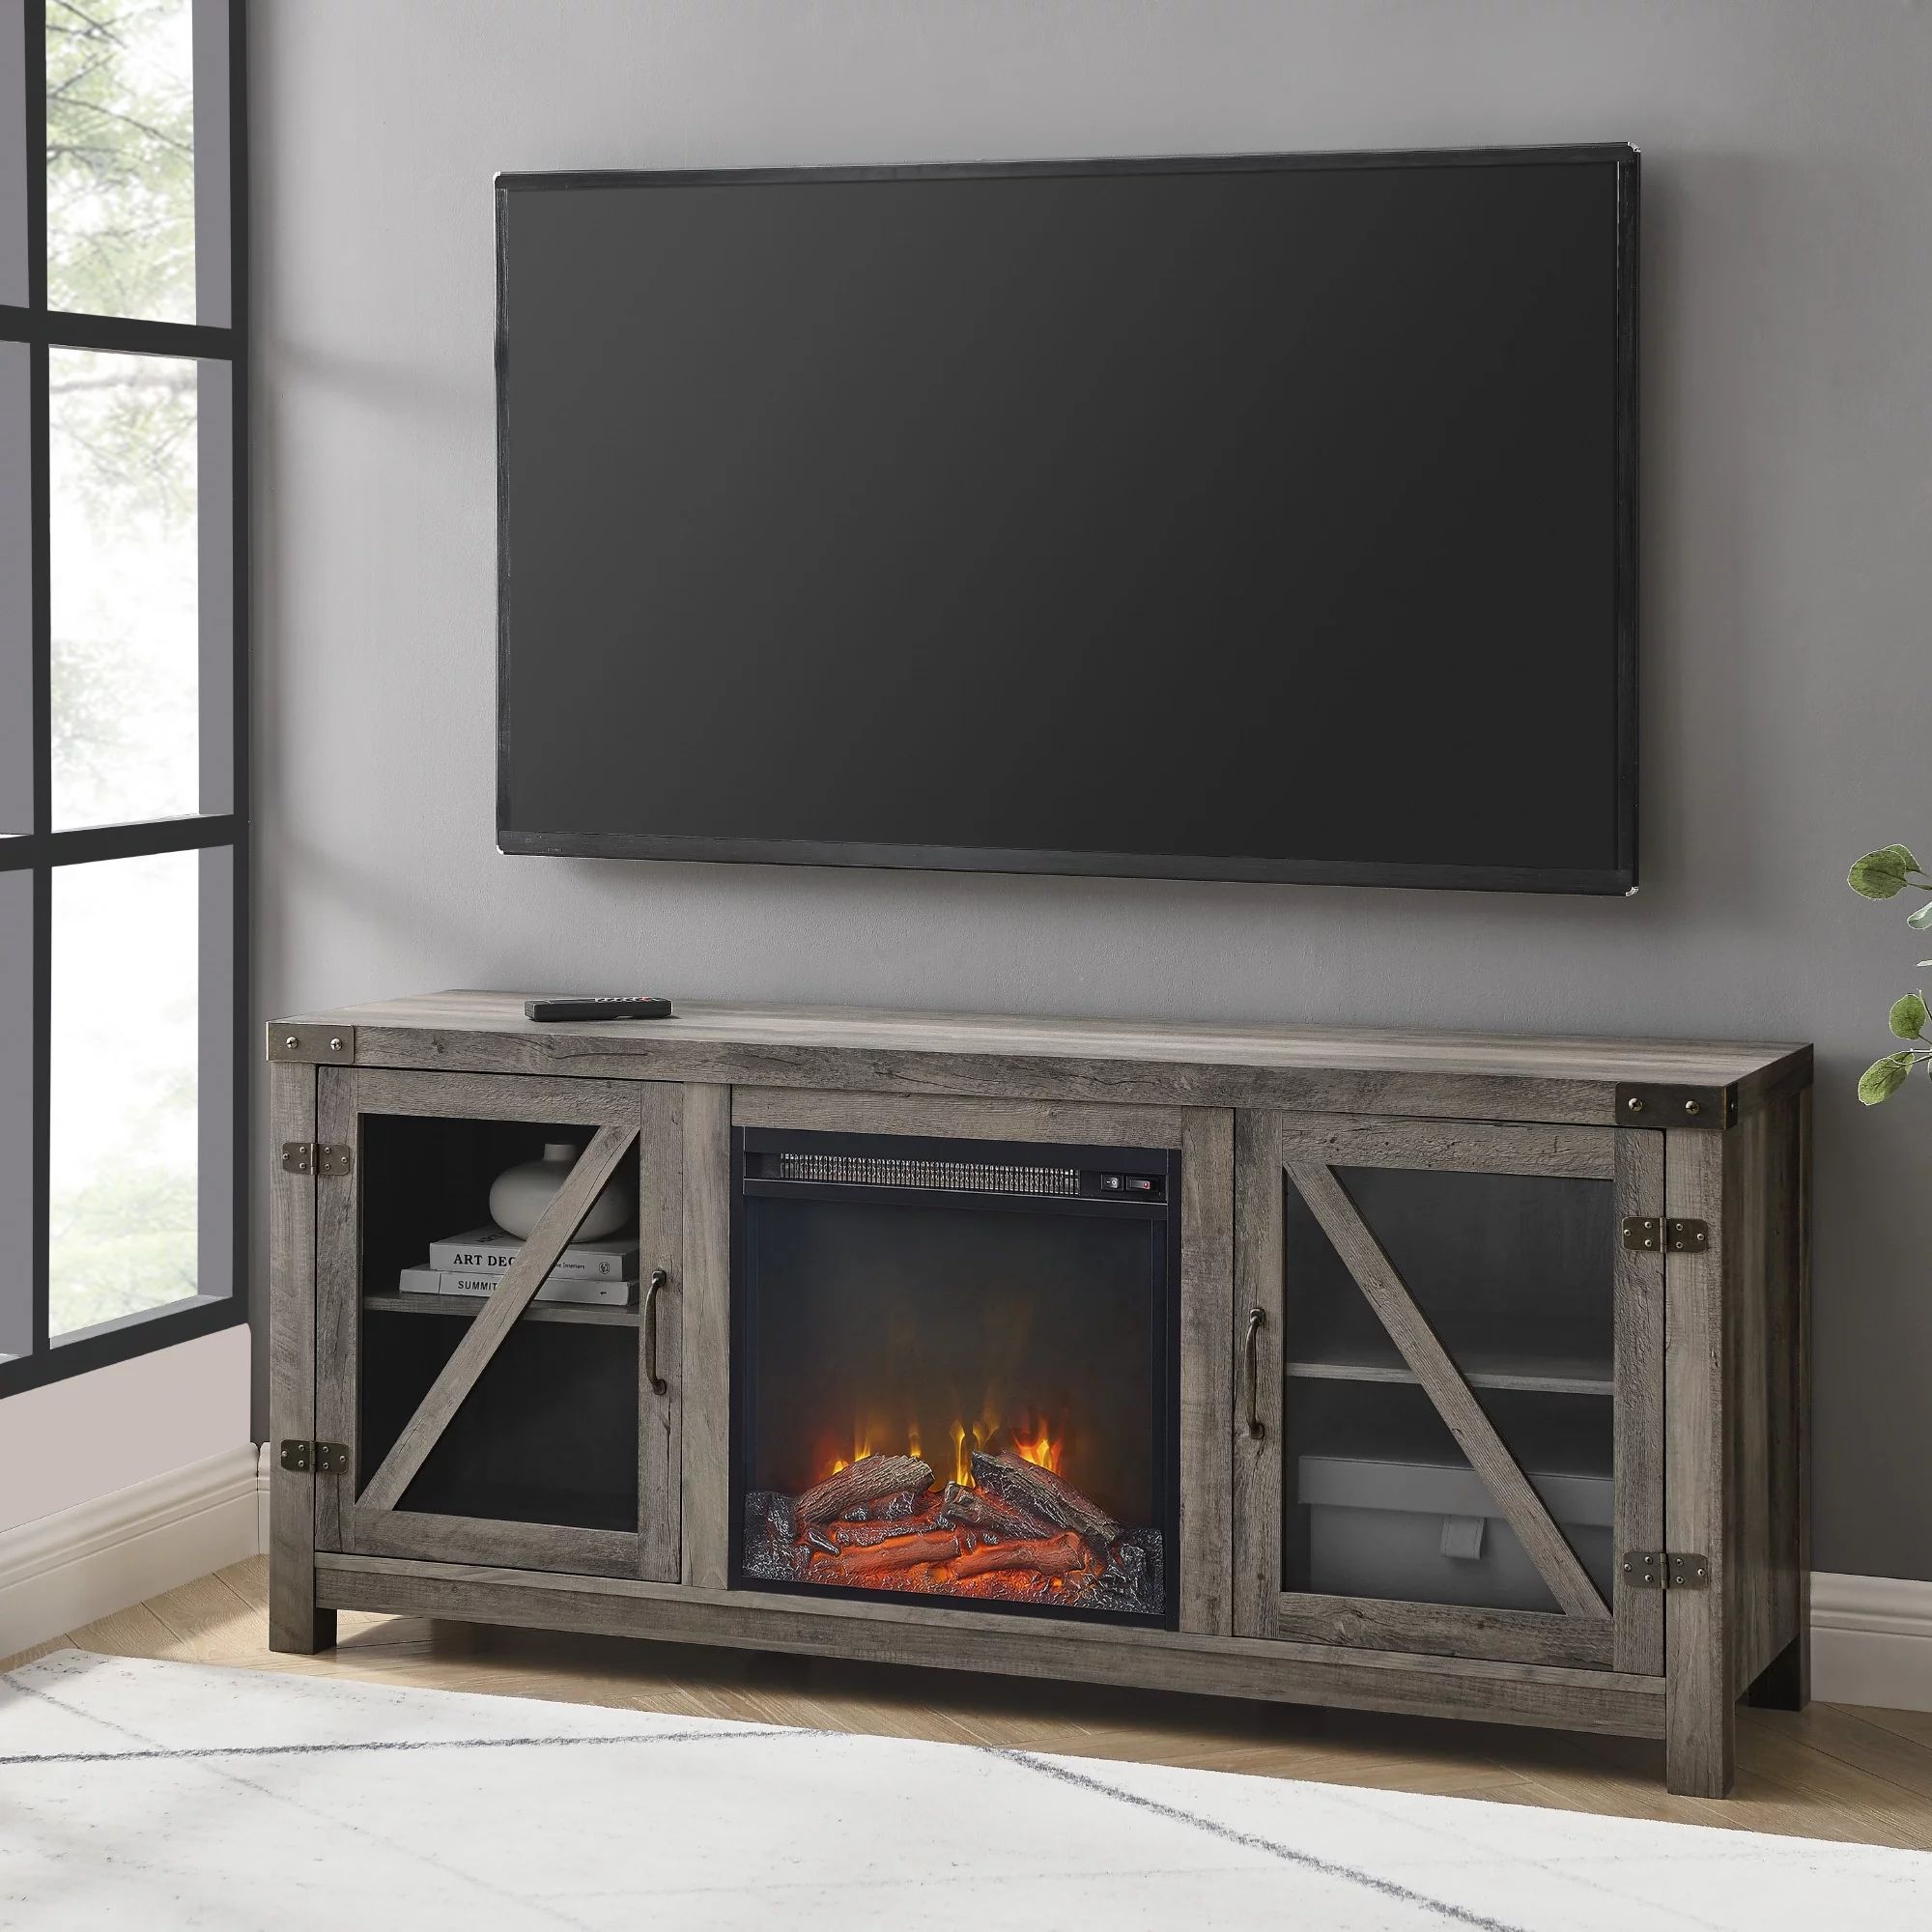 Manor Park Farmhouse Fireplace TV Stand for TVs up to 65", Grey Wash | Walmart (US)